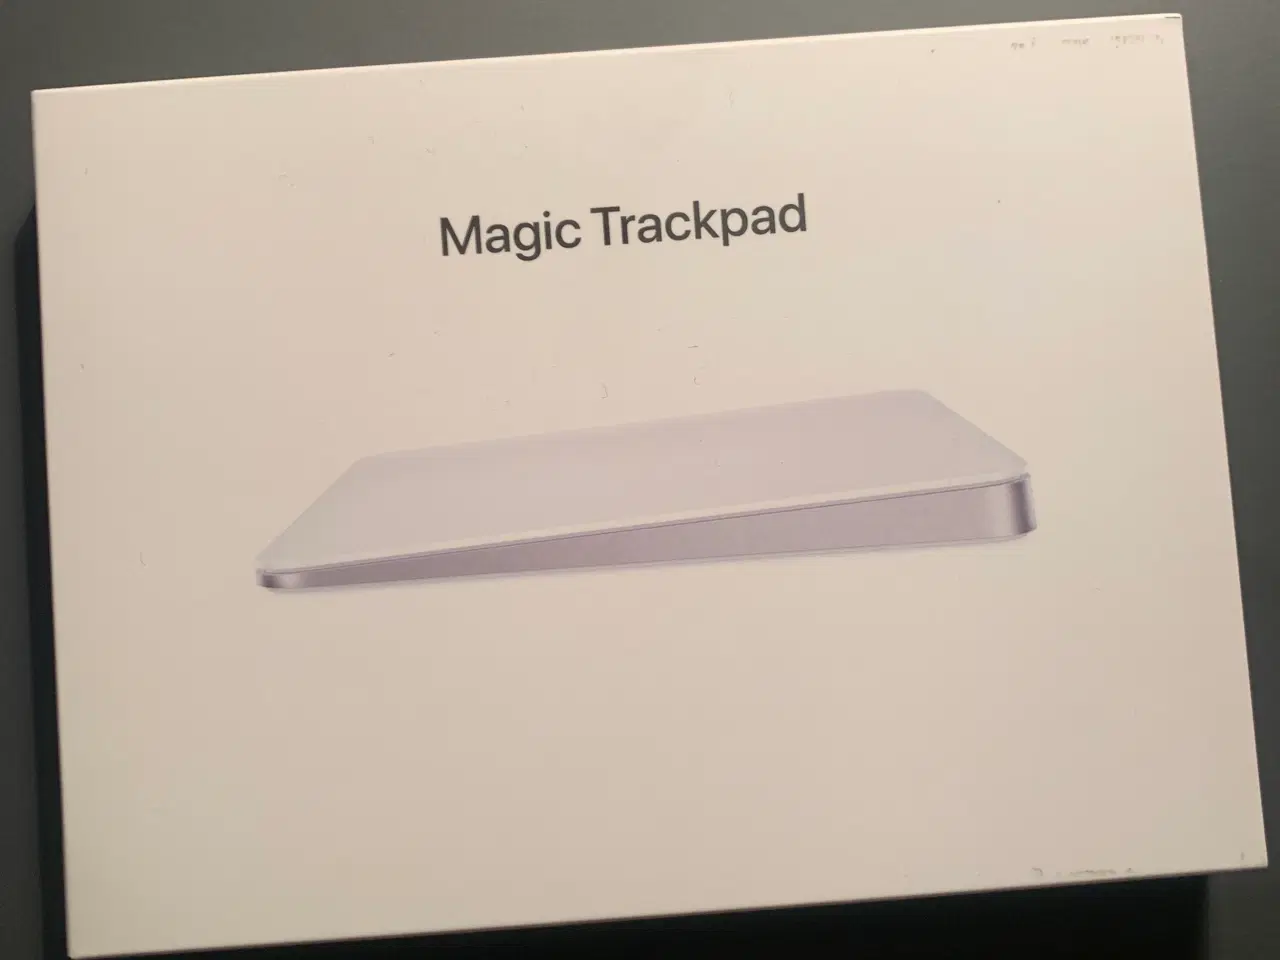 Billede 1 - Apple Magic Trackpad – hvid Multi-Touch-overflade